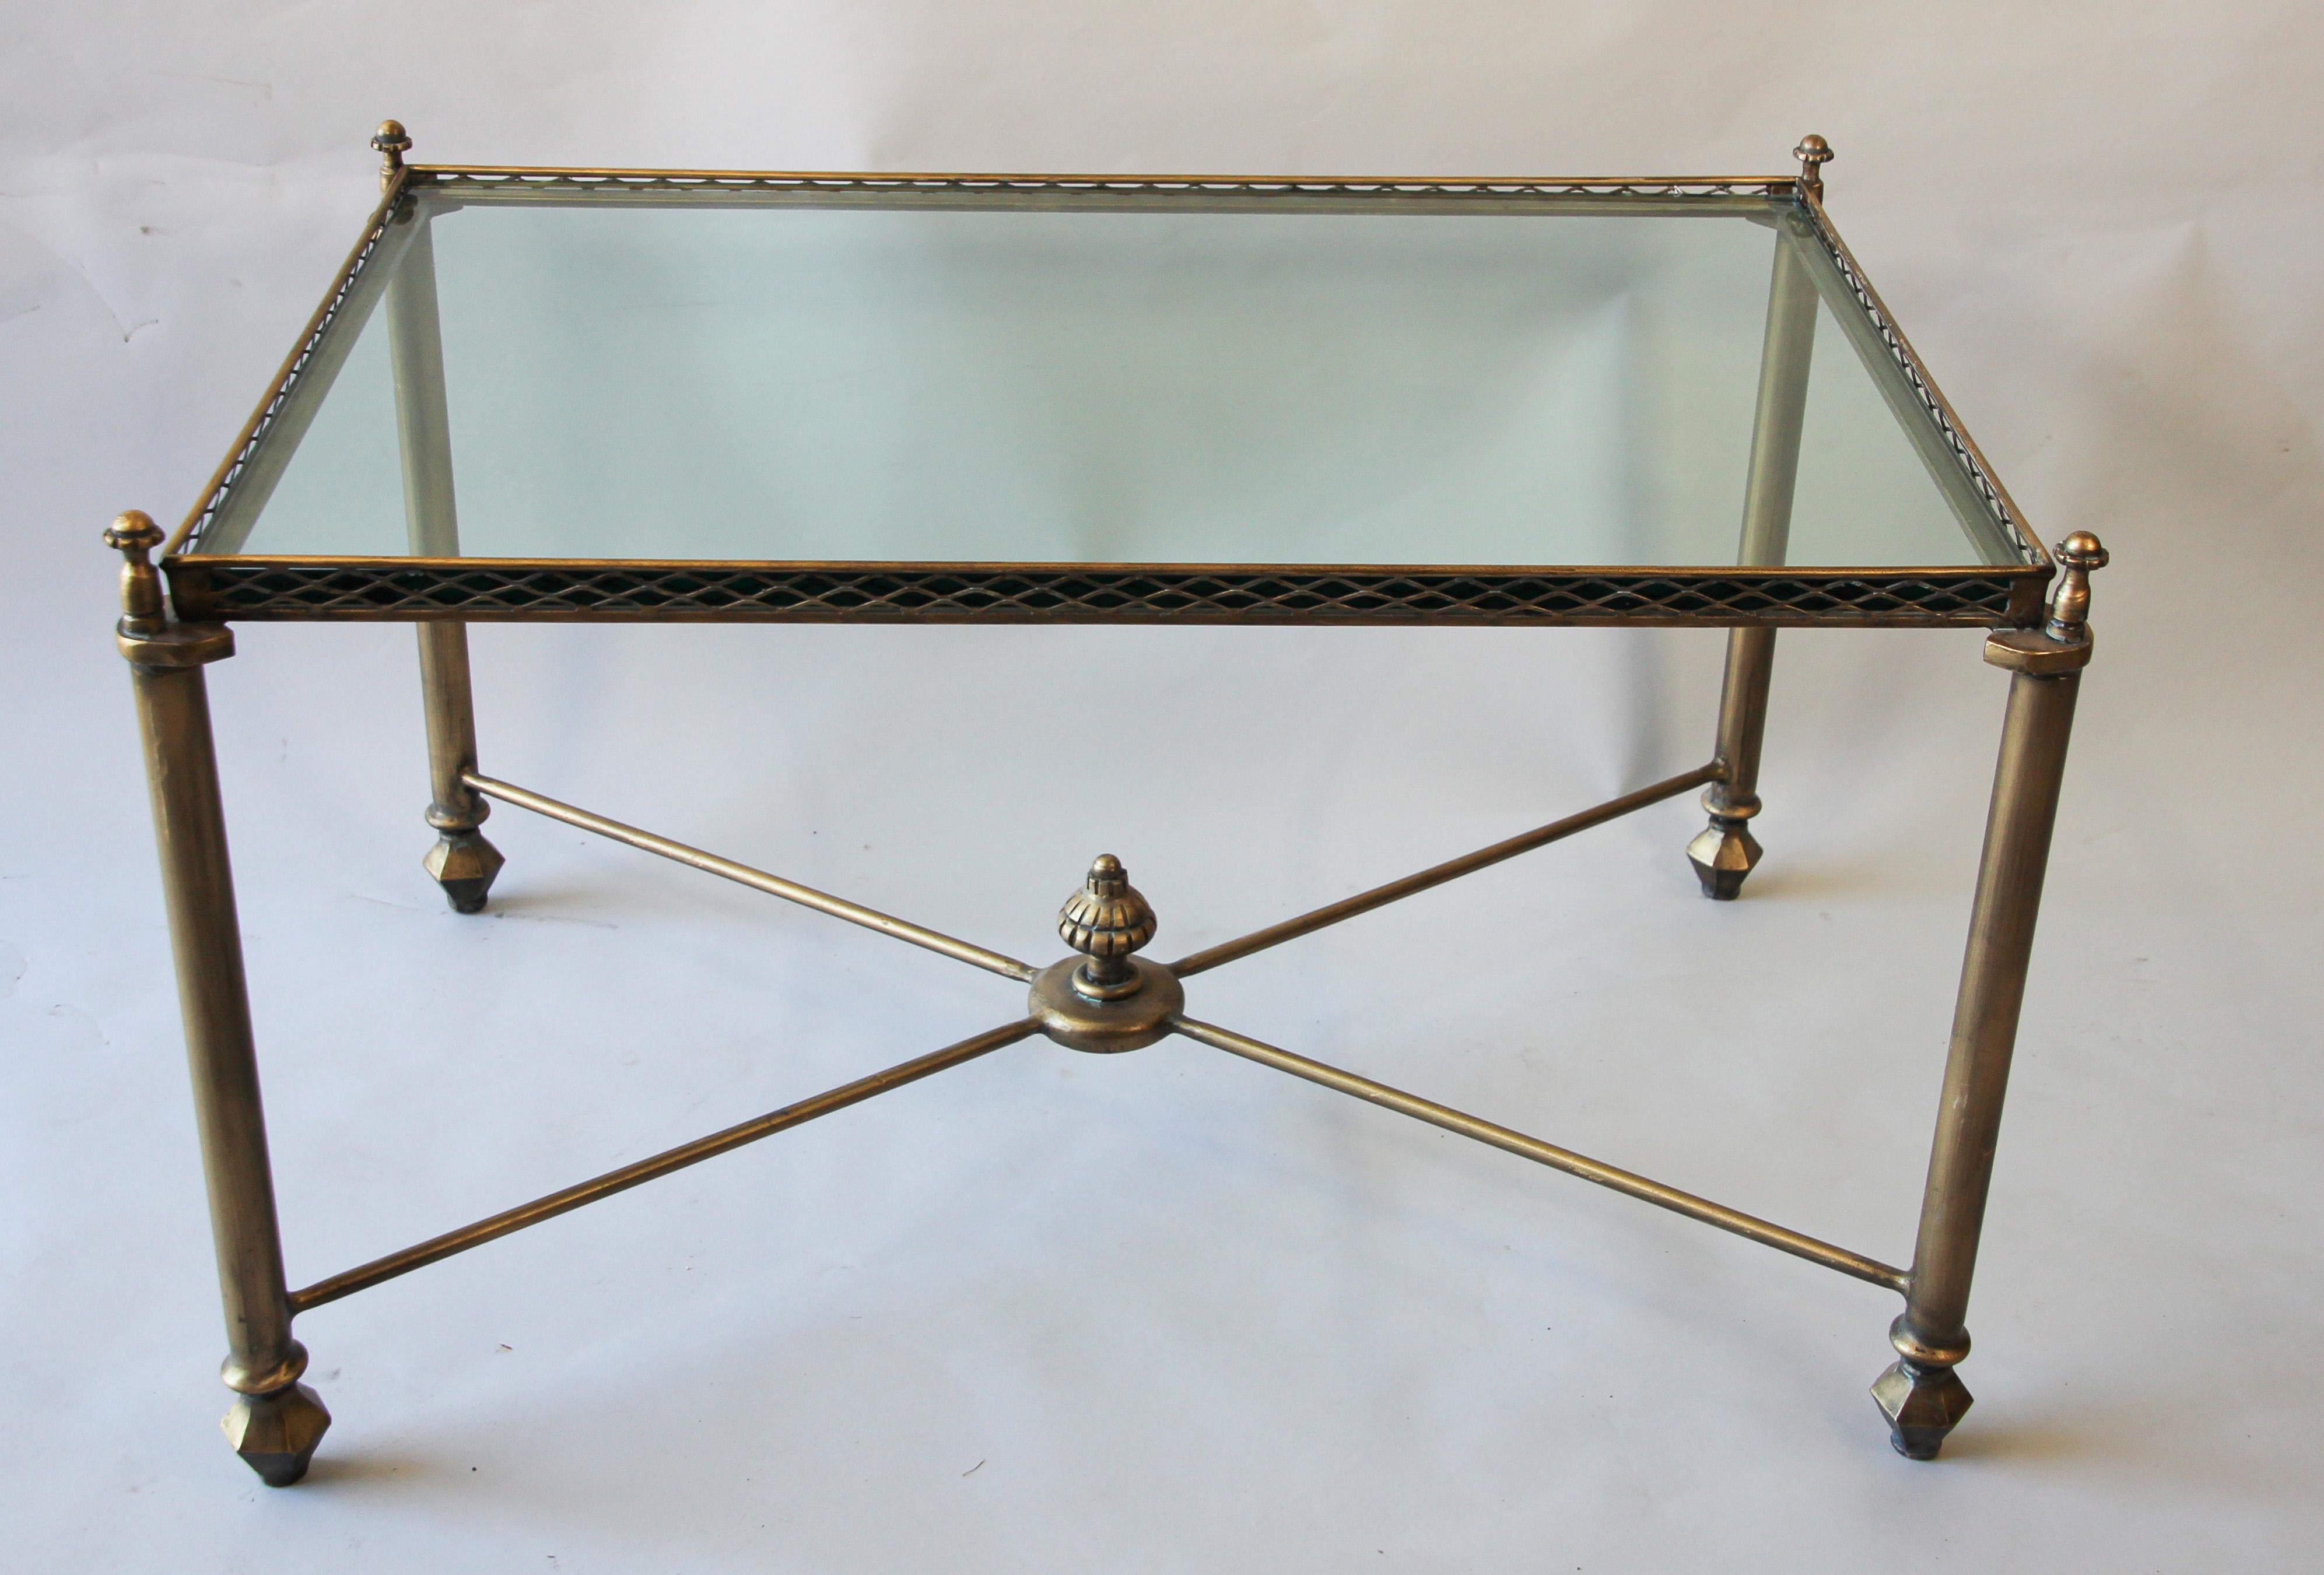 Italian Maison Jansen style brass coffee table with glass top.
Beautiful elegant neoclassical style rectangular brass coffee table.
A good quality circa 1970s heavyweight brass coffee table with very thick glass top.
This Hollywood Regency style